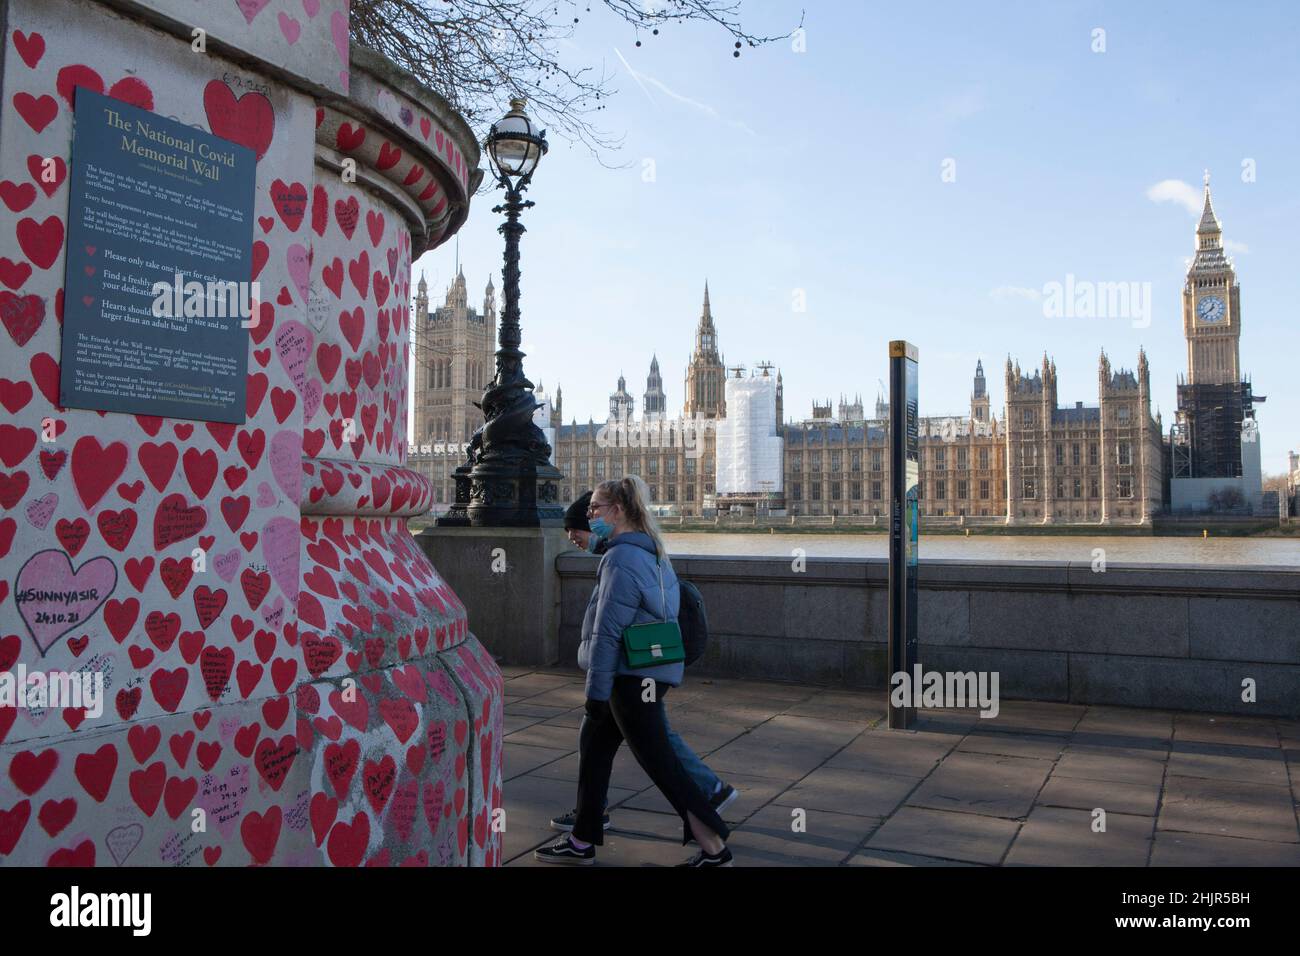 London, UK, 31 January 2022: The National Covid Memorial Wall and the Houses of Parliament, where Prime Minister Boris Johnson is speaking this afternoon about the findings of the report compiled by civil servant Sue Gray about breaches of lockdown laws at 10 Downing Street during the coronavirus pandemic. Anna Watson/Alamy Live News Stock Photo